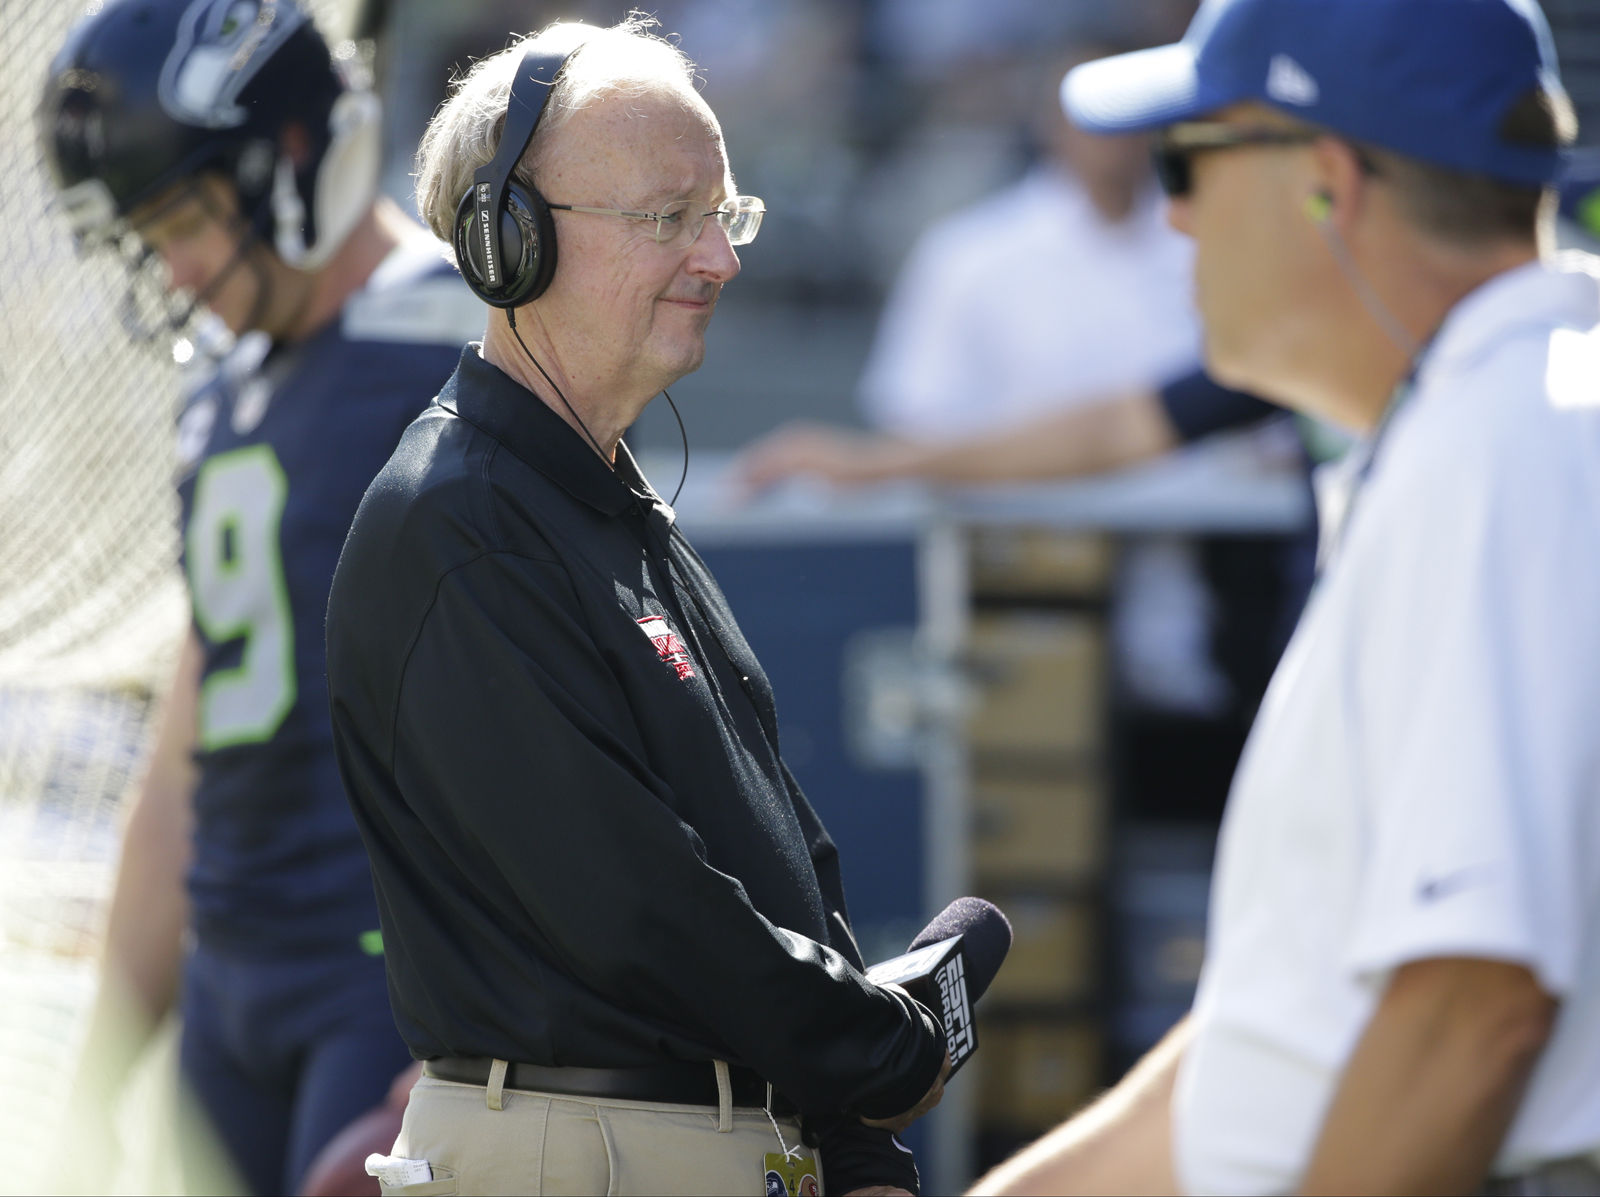 John "The Professor" Clayton, an NFL football writer and reporter was one of the 100 on-air talent laid off by ESPN in April 2017. In this file photo he stands on the sideline during an NFL football game between the Seattle Seahawks and the San Francisco 49ers, Sunday, Sept. 25, 2016, in Seattle. (AP Photo/Ted S. Warren)